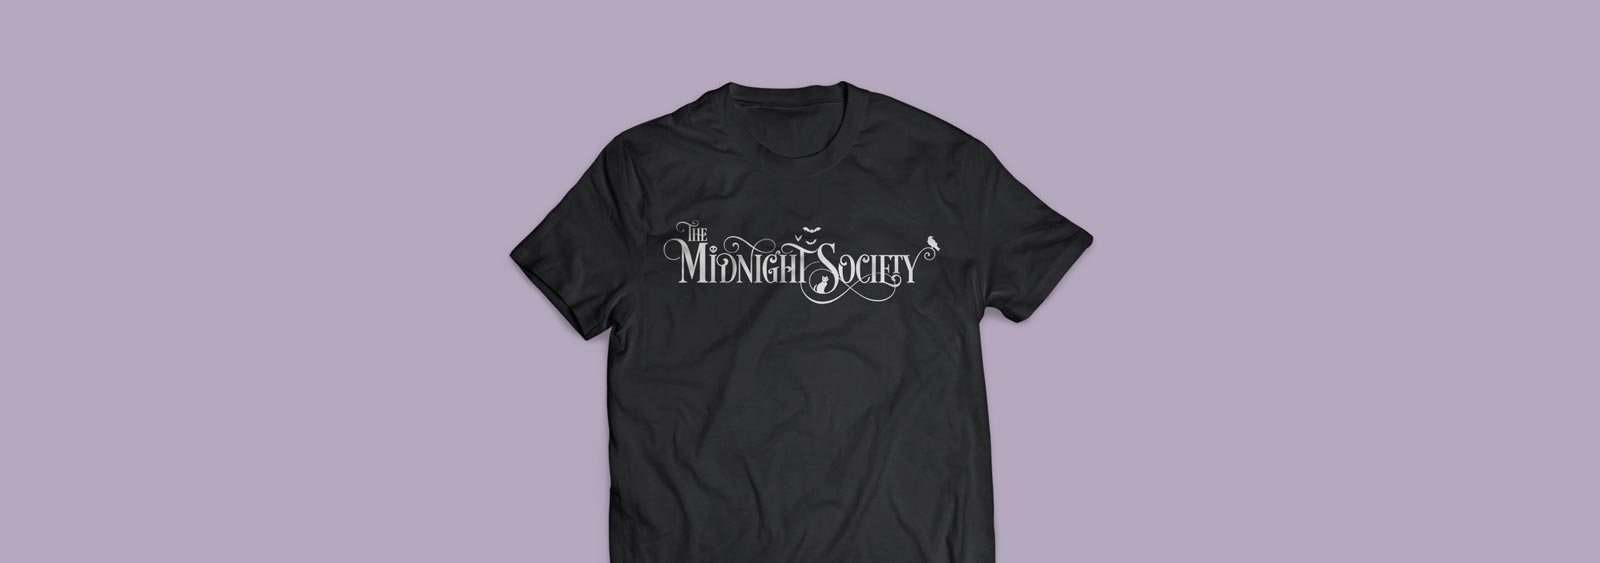 The Midnight Society logotype design by Noisy Ghost Co.